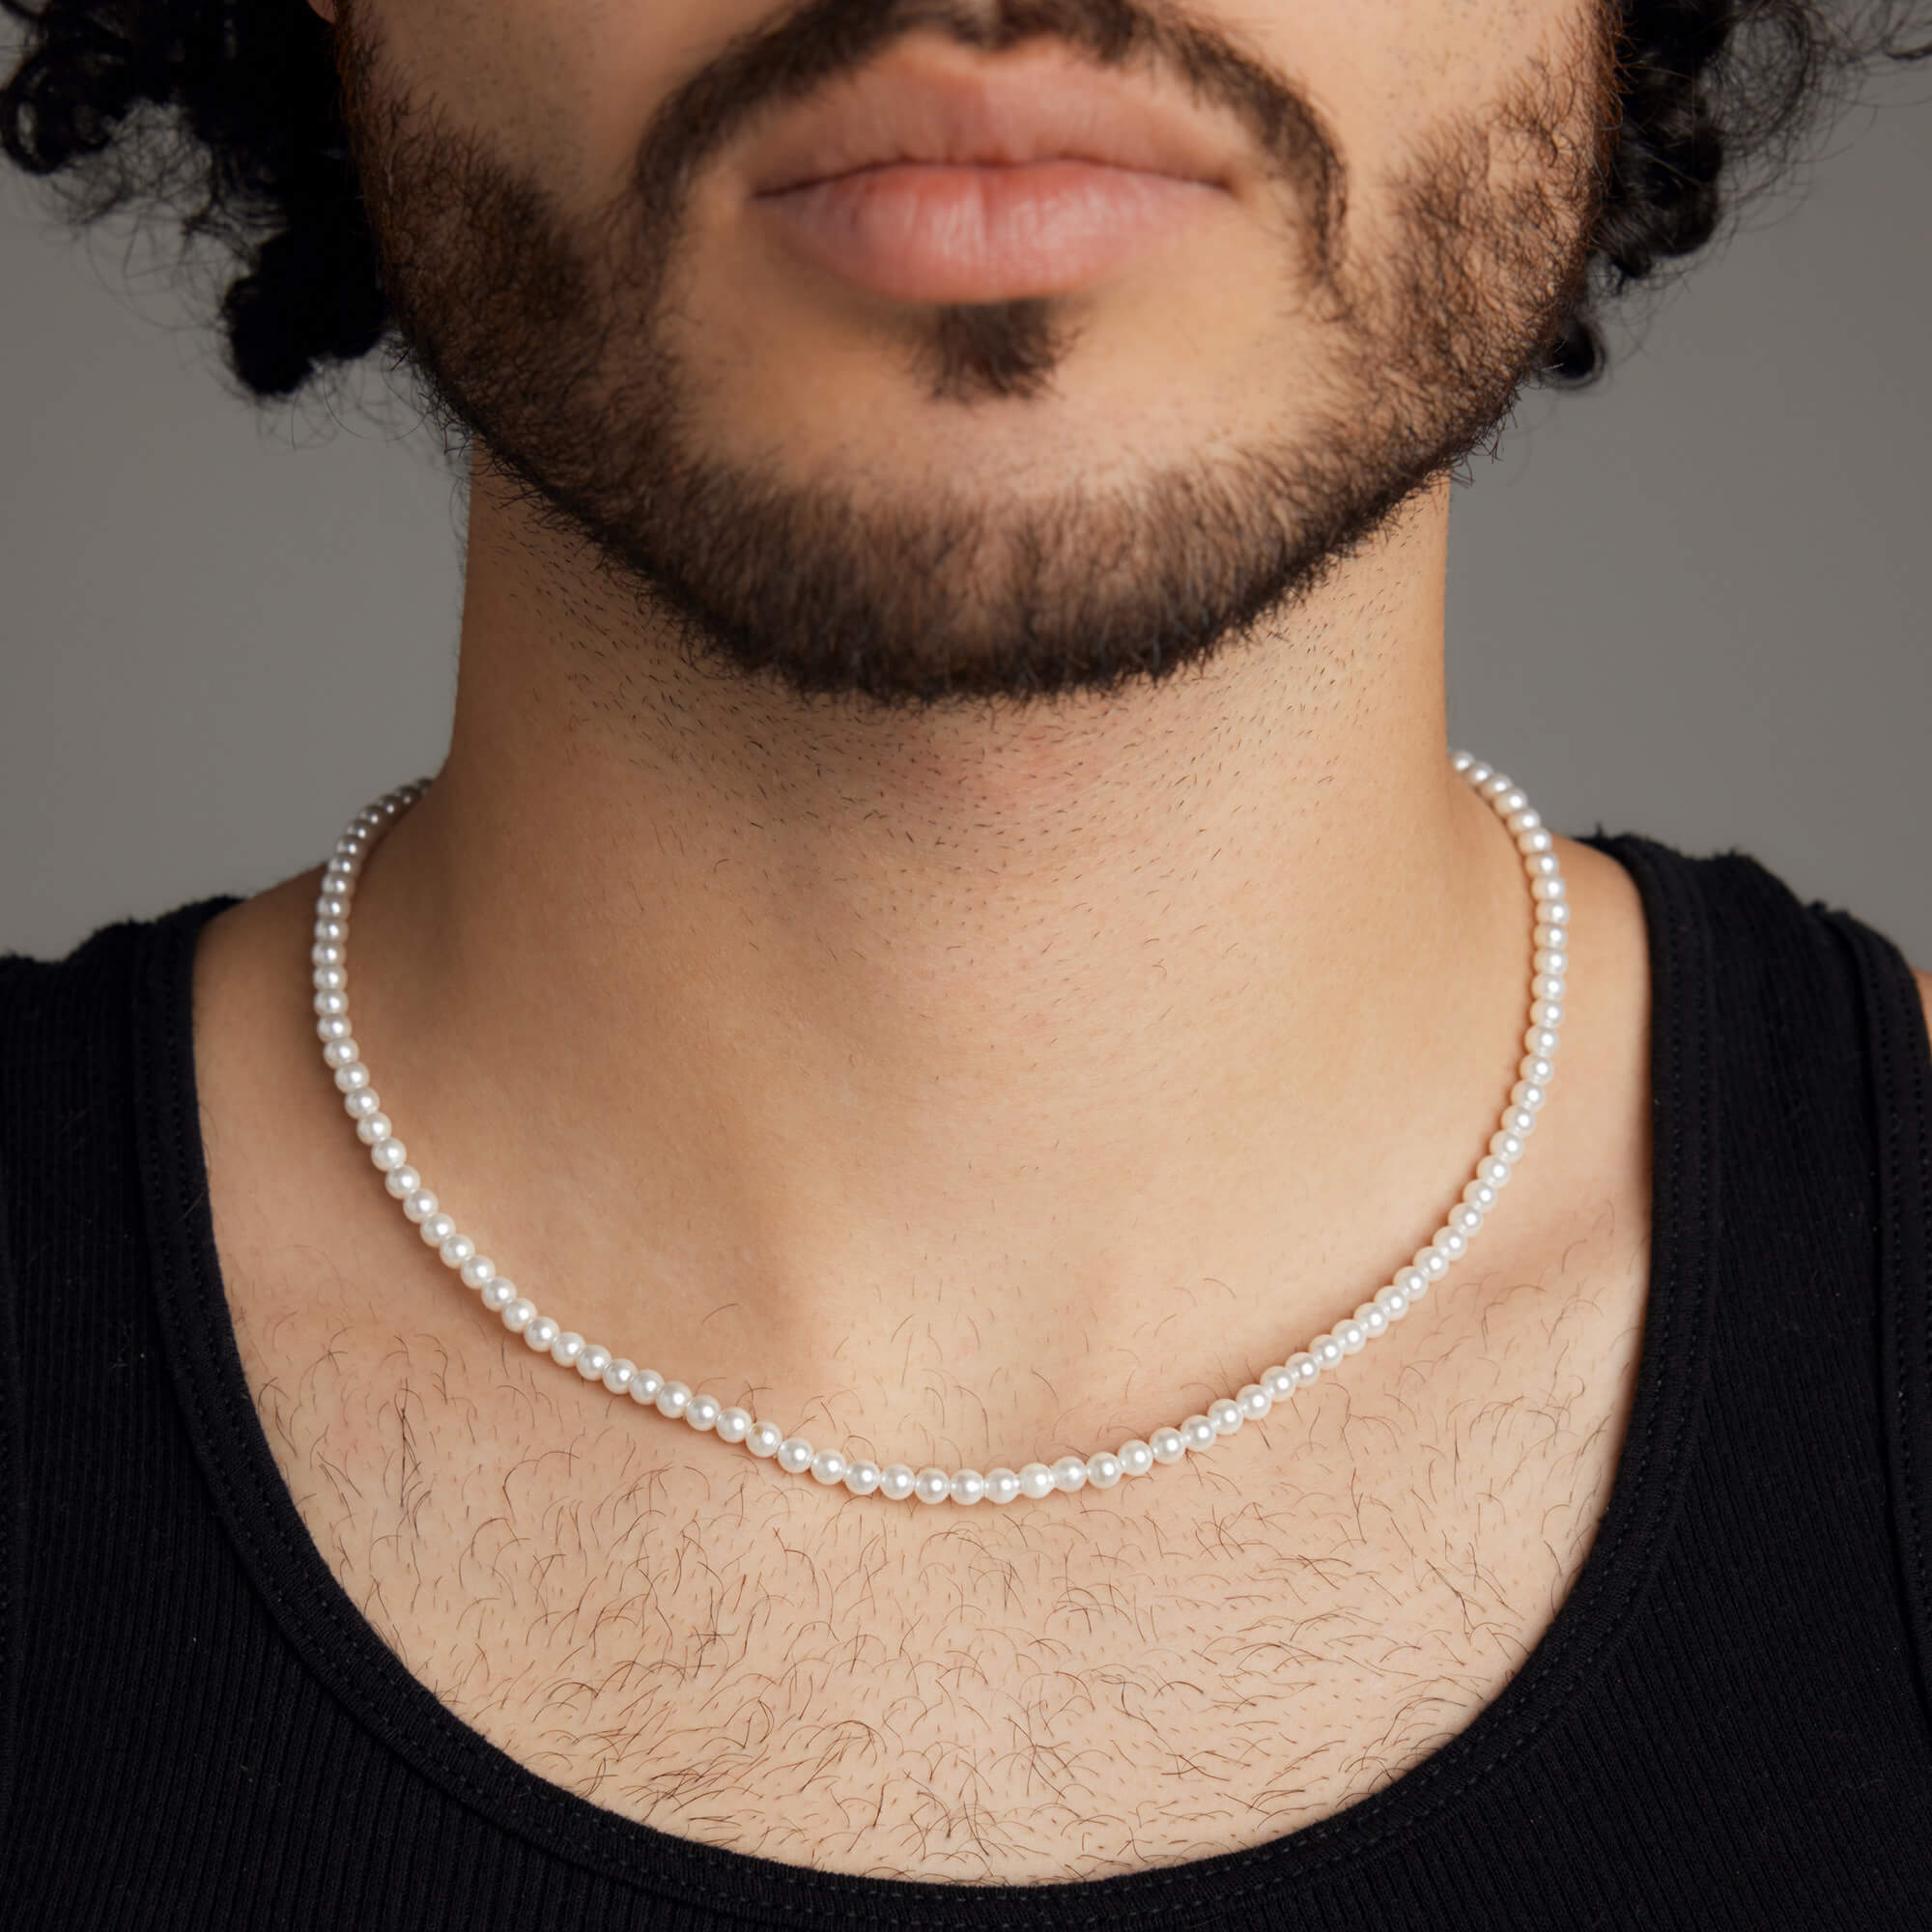 Baby Var men's necklace by Five Jwlry, designed with 4mm white glass bead pearls complemented by a silver or gold stainless steel buckle. Adjustable in size from 37cm to 42cm with a 5cm extension. Crafted from water-resistant 316L stainless steel. Hypoallergenic with a 2-year warranty.